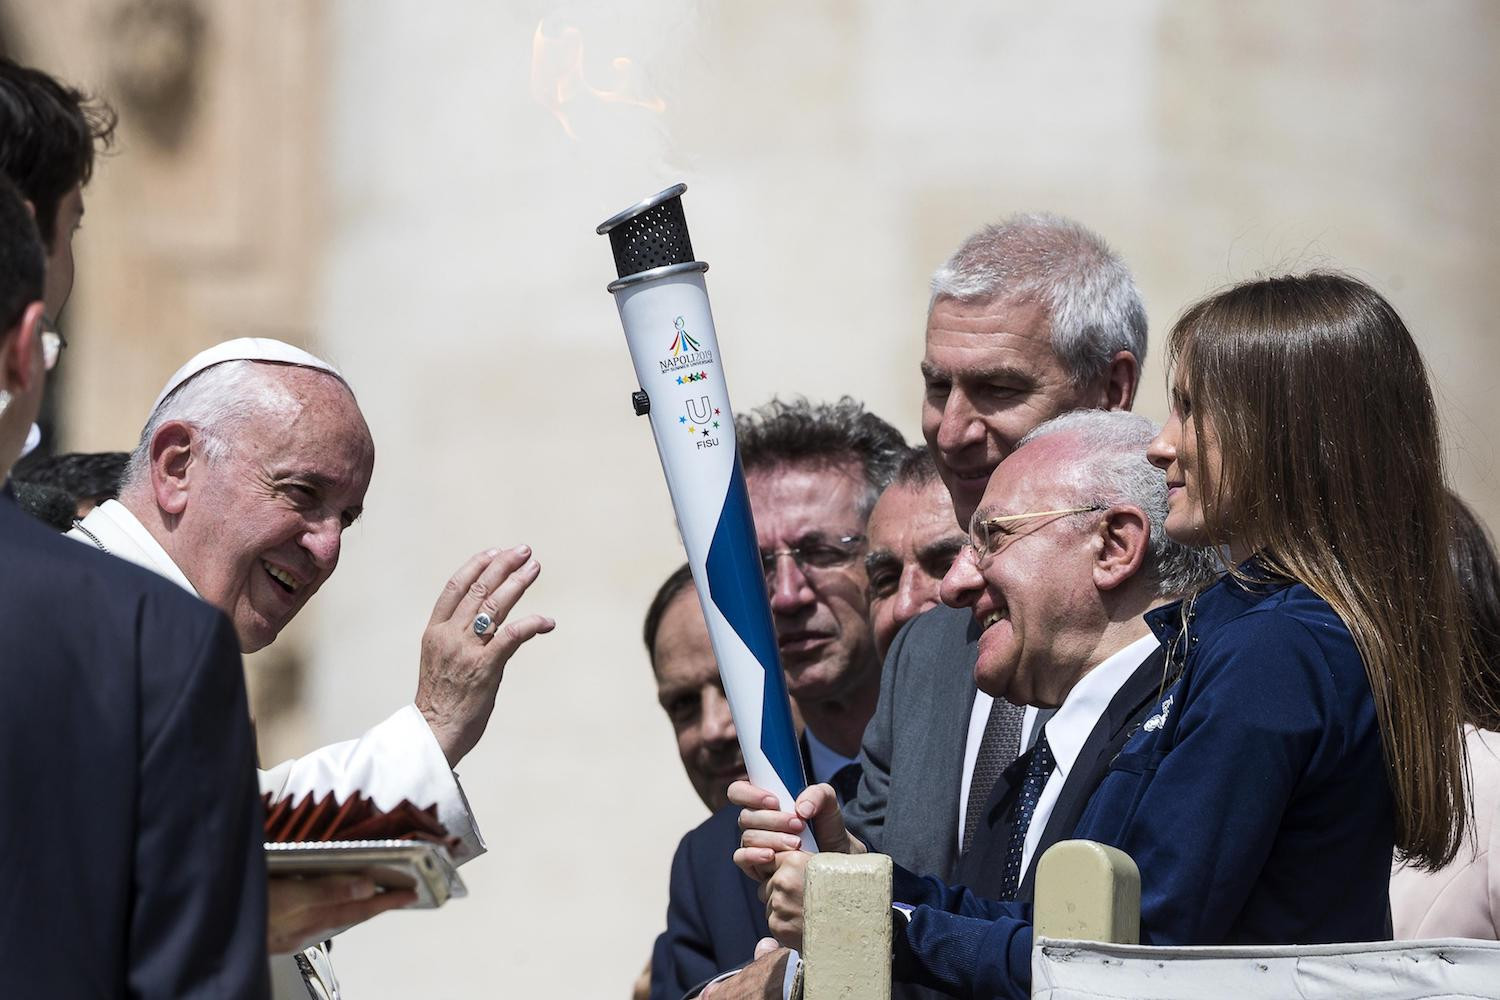 The Naples 2019 Torch Relay reaches the Vatican to be blessed by Pope Francis - now the Vatican plans to form an NOC ©Getty Images